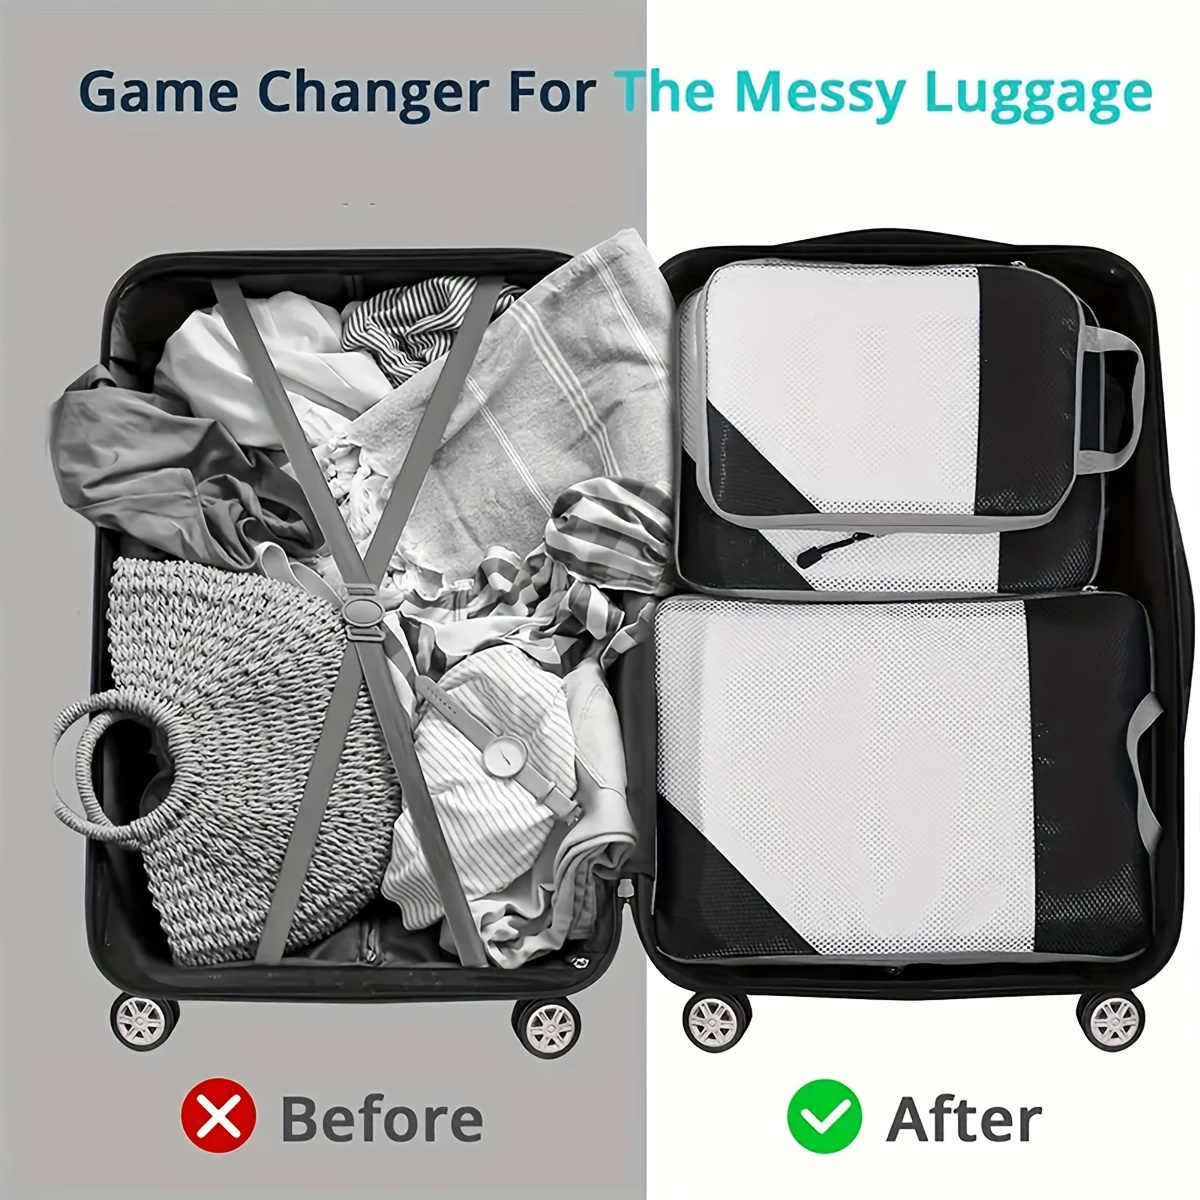 This Luggage Cover Is a Travel Game-changer